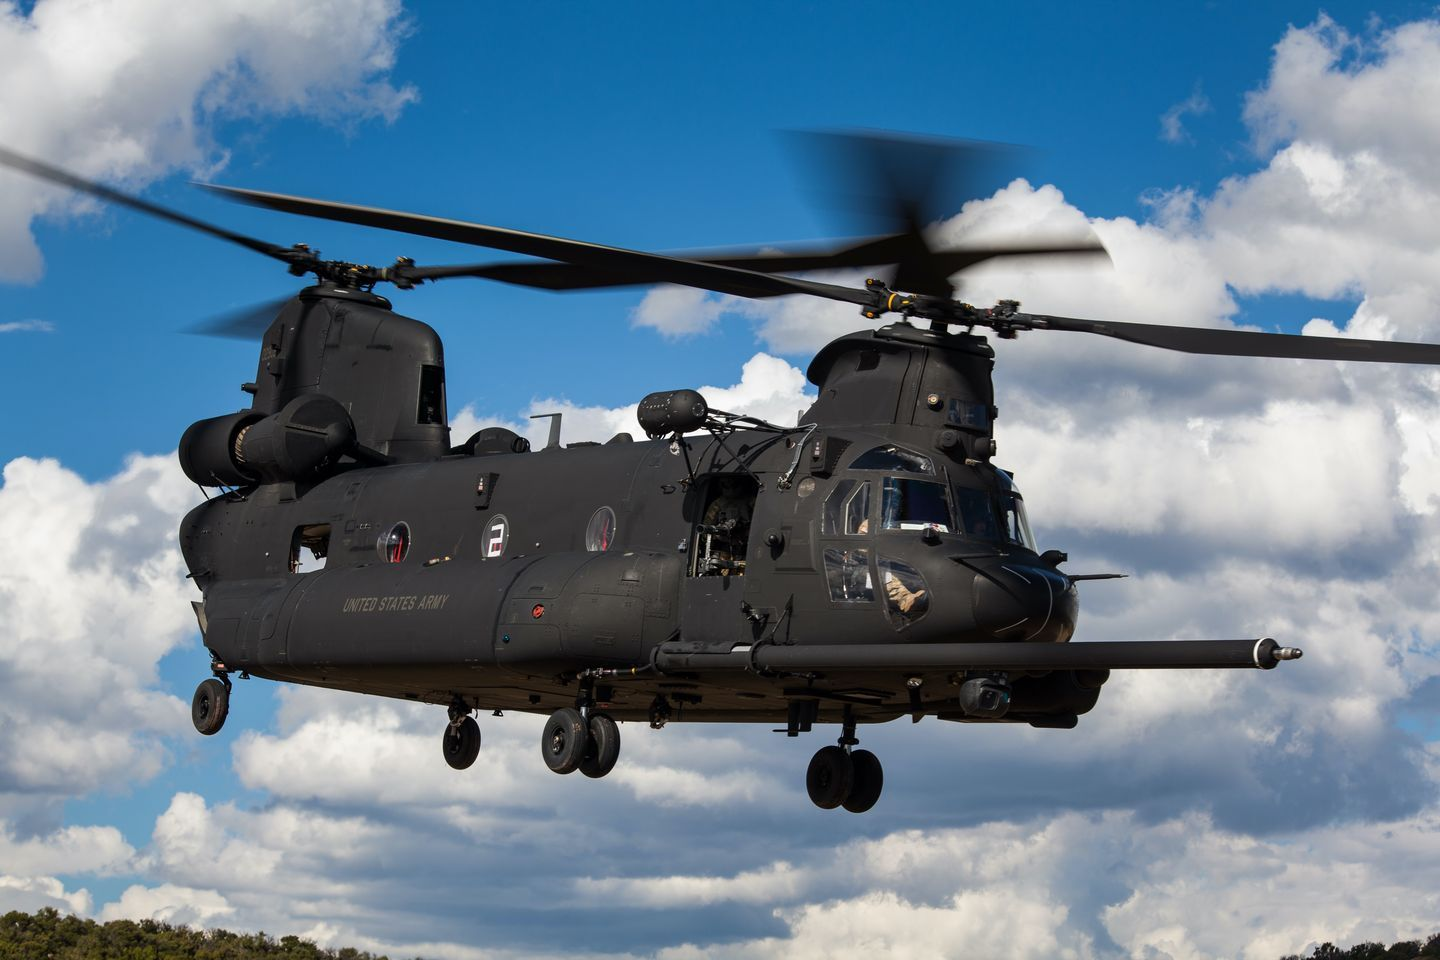 Here's the New Heavy Lift Helicopter for U.S. Commandos